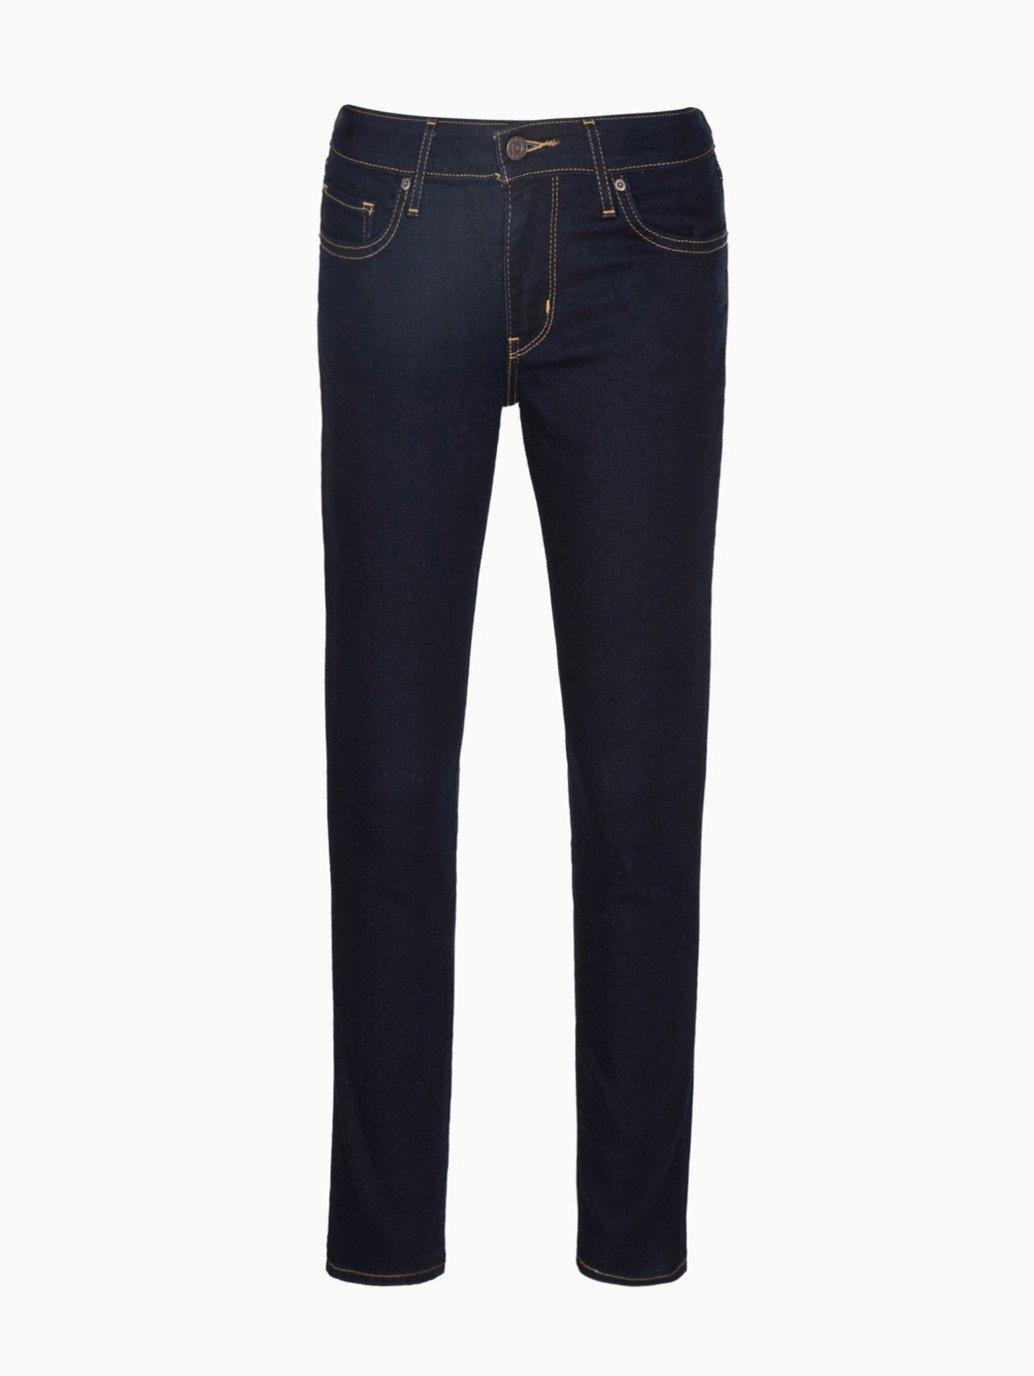 levis malaysia Levis 711 Skinny Jeans 188810012 13 Details